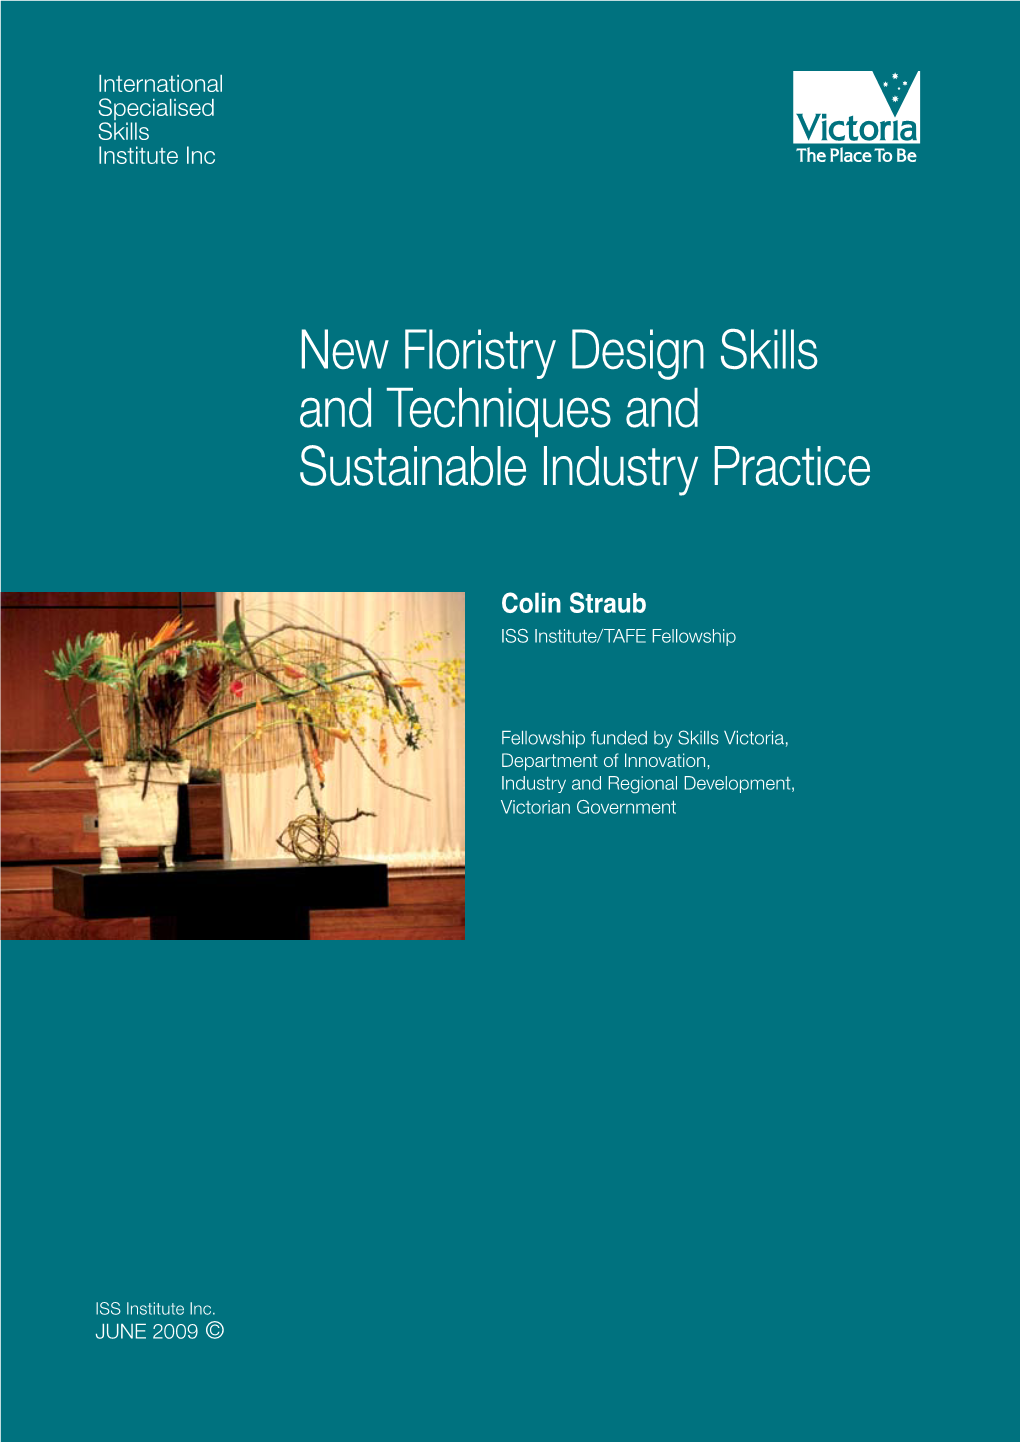 New Floristry Design Skills and Techniques and Sustainable Industry Practice